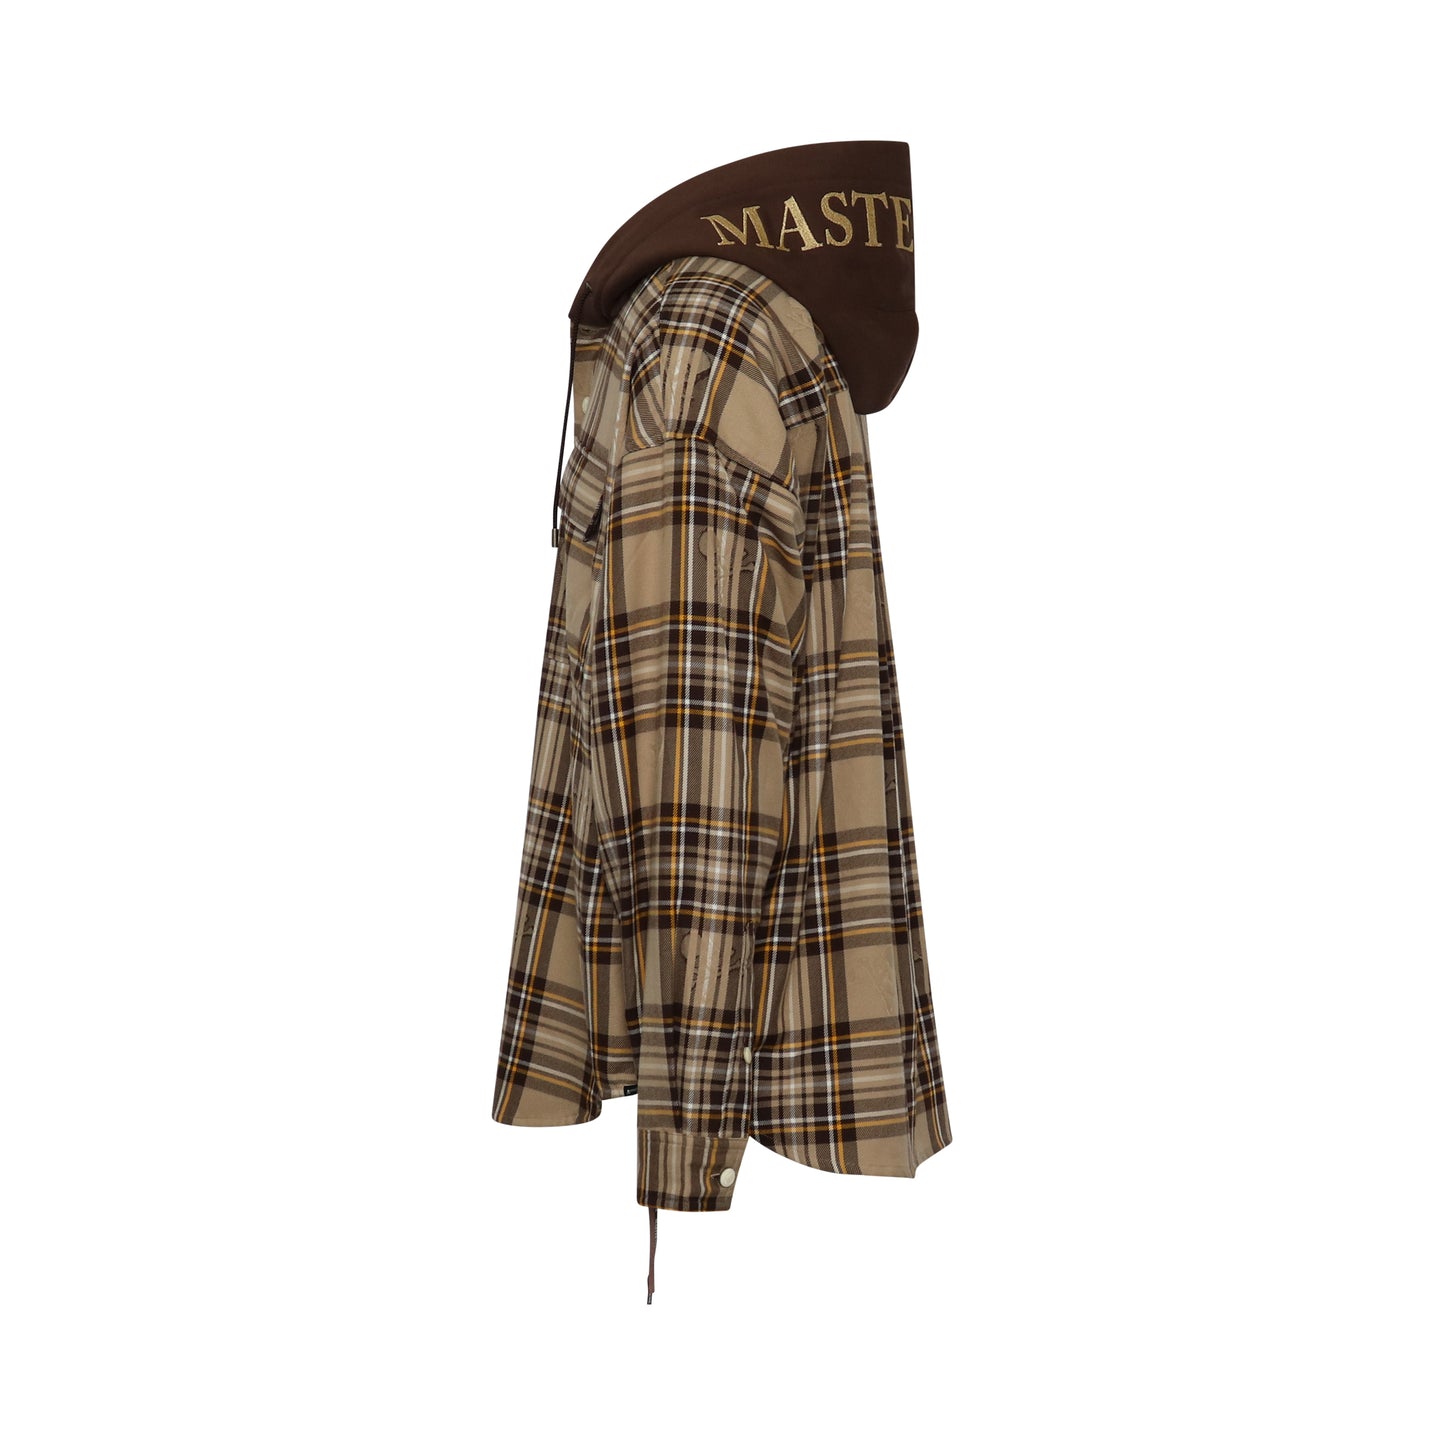 Hooded Plaid Emboidered Logo Shirt in Sand